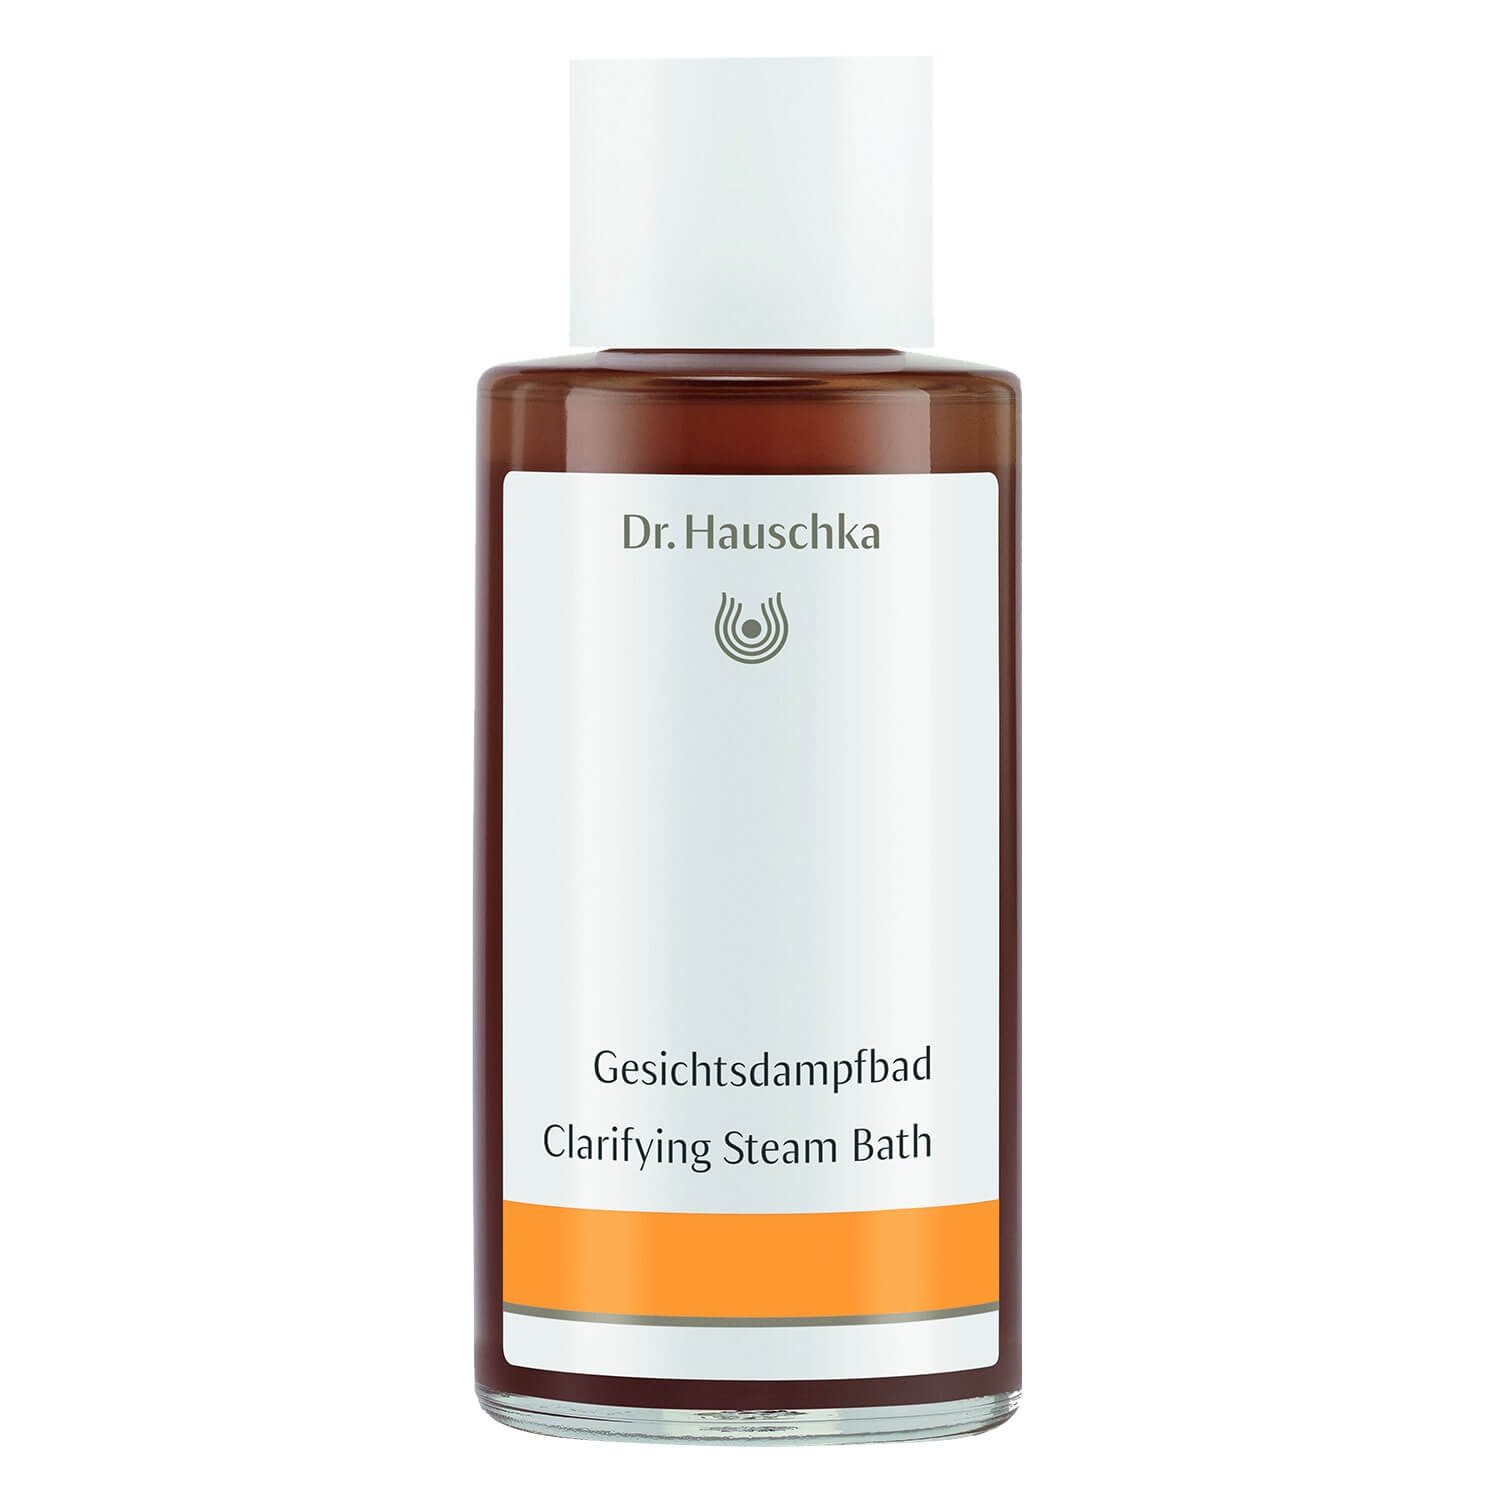 Product image from Dr. Hauschka - Gesichtsdampfbad